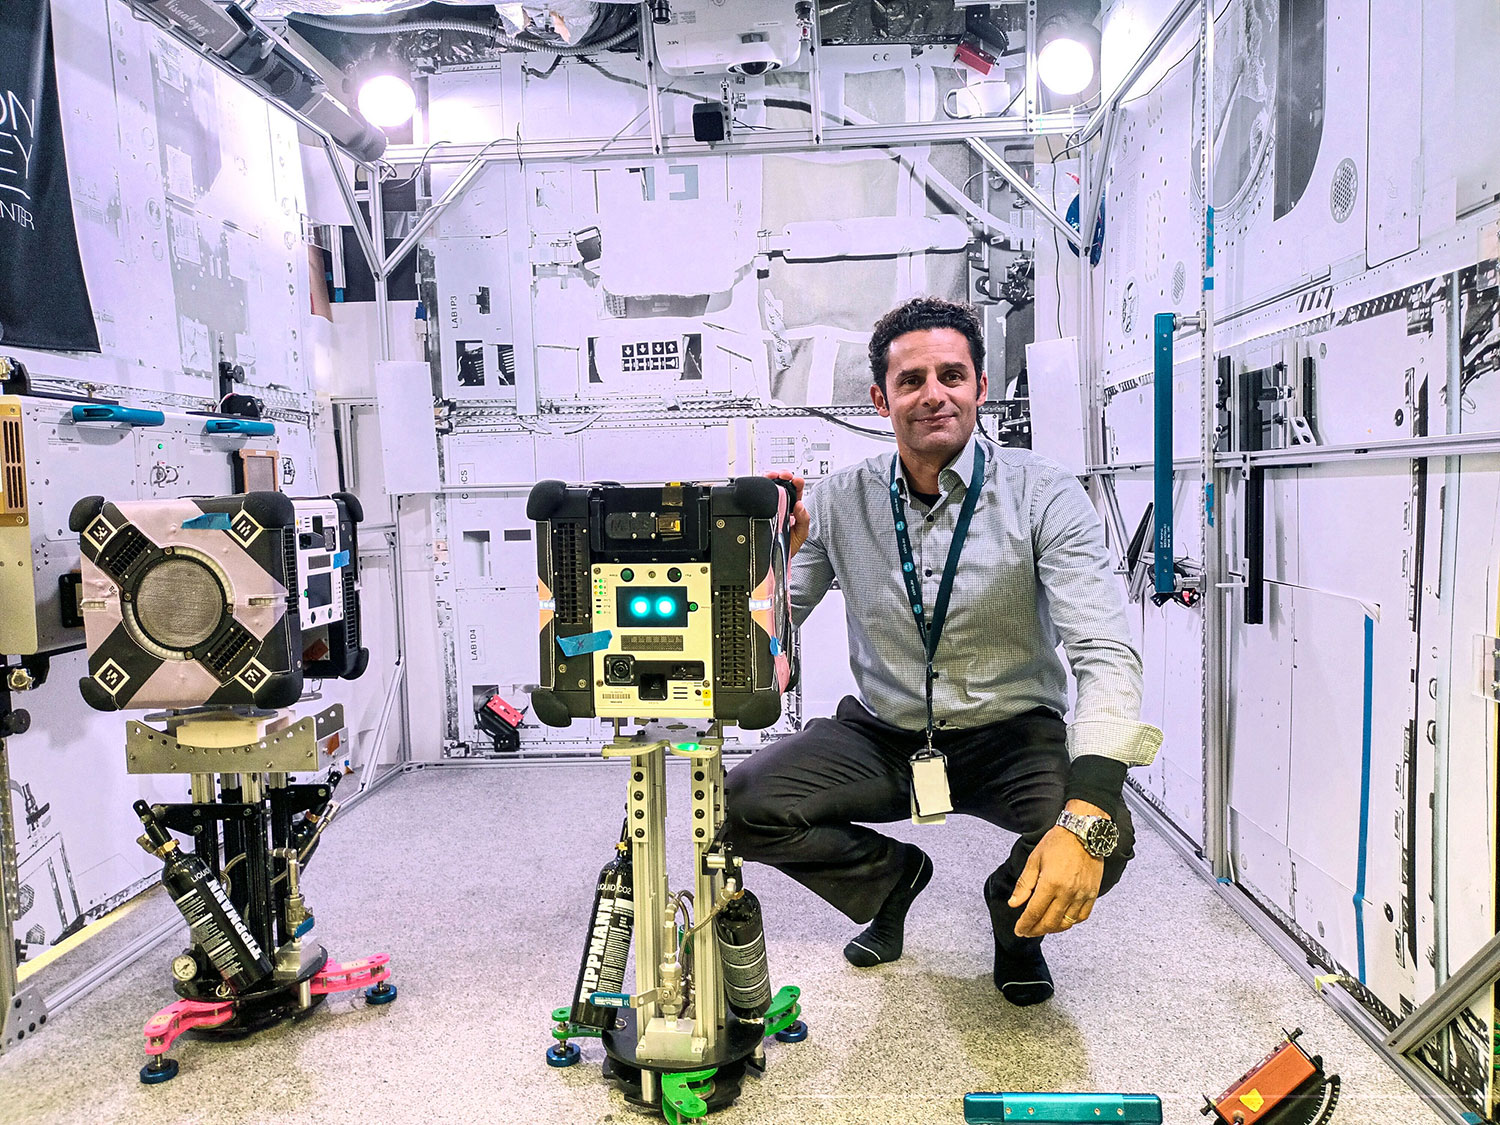 CSIRO Project Lead Dr. Marc Elmouttie with the Multi-Resolution Scanning payload, housed within an Astrobee robot.